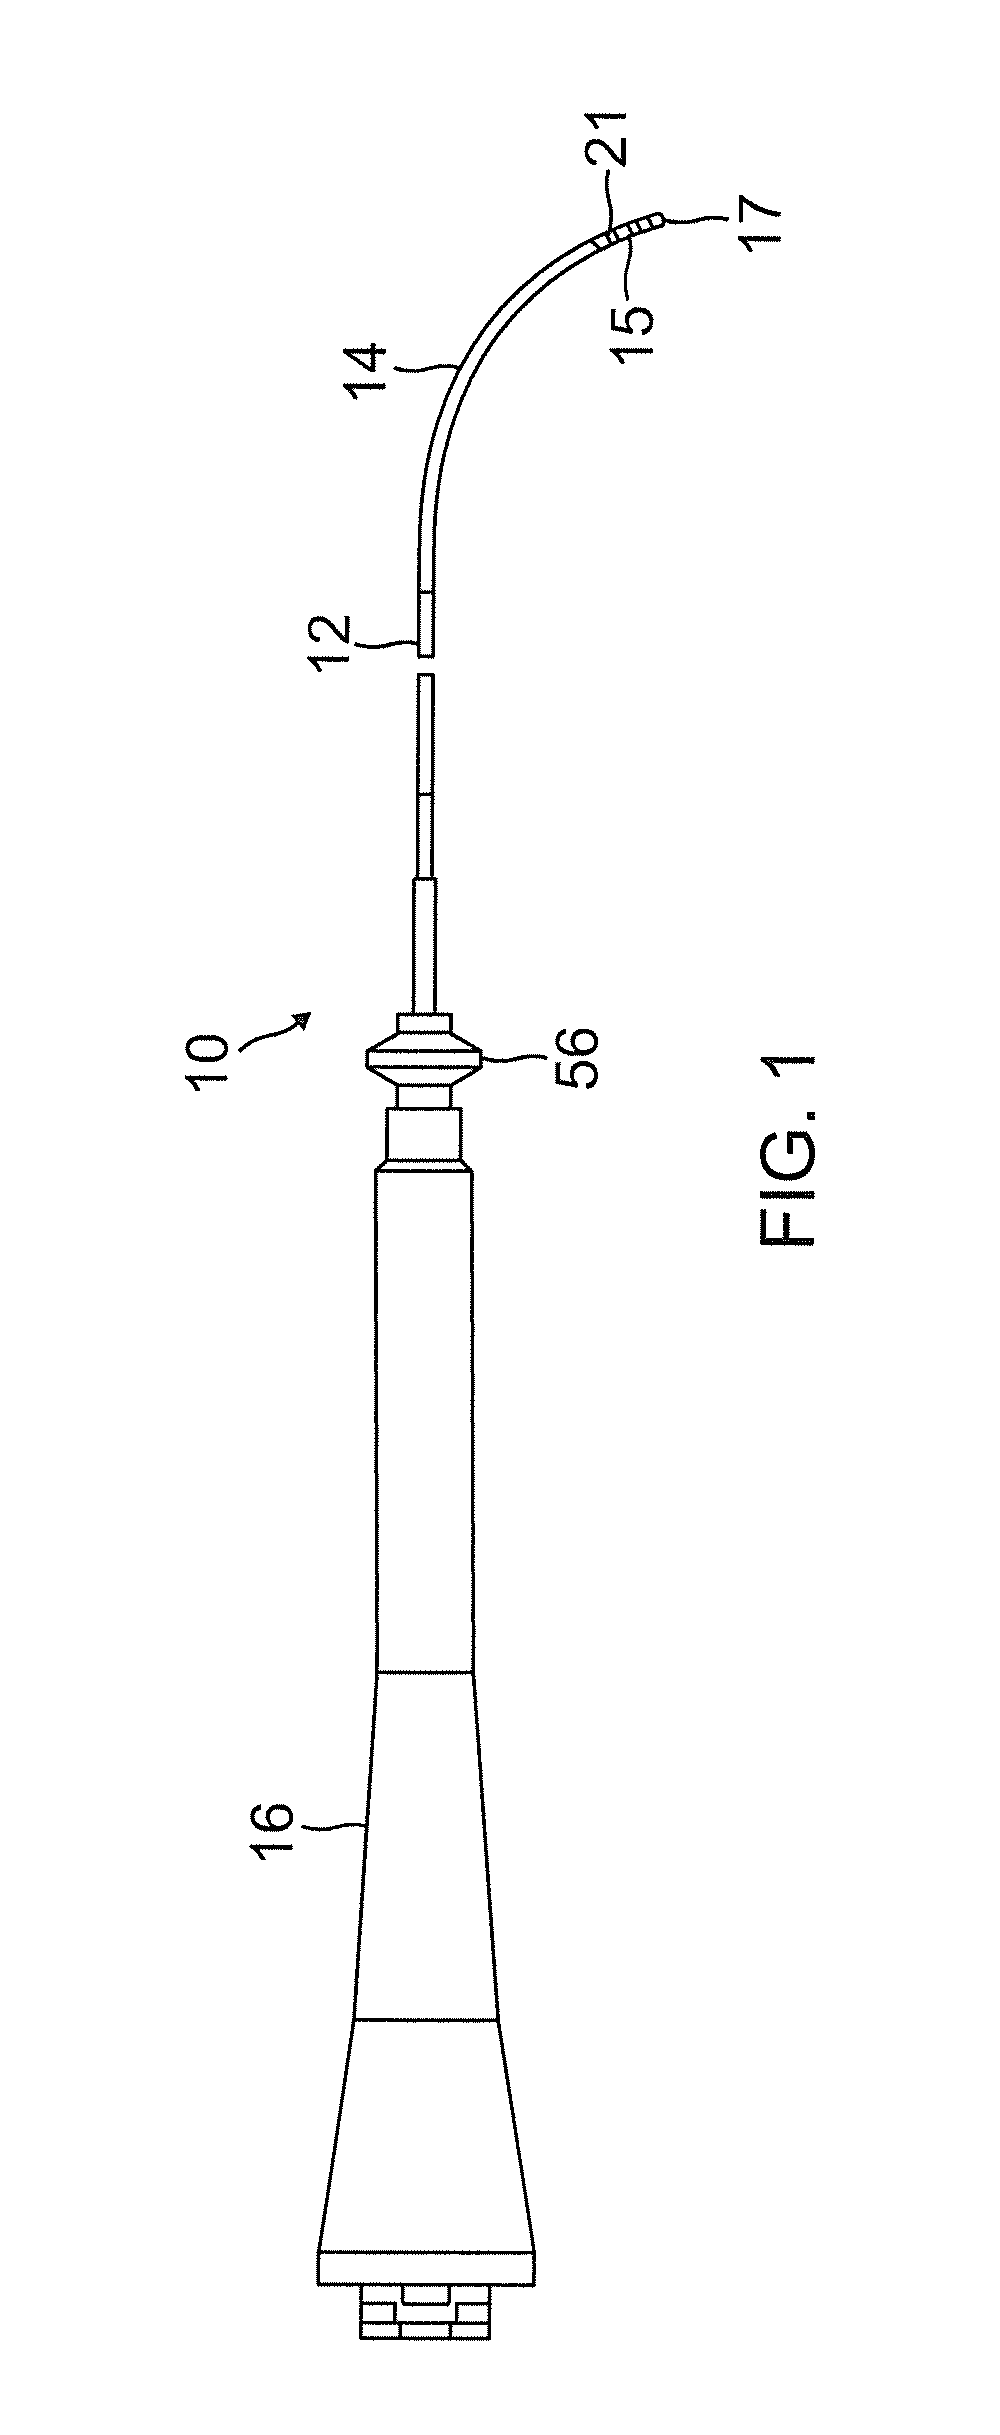 Unidirectional catheter control handle with tensioning control